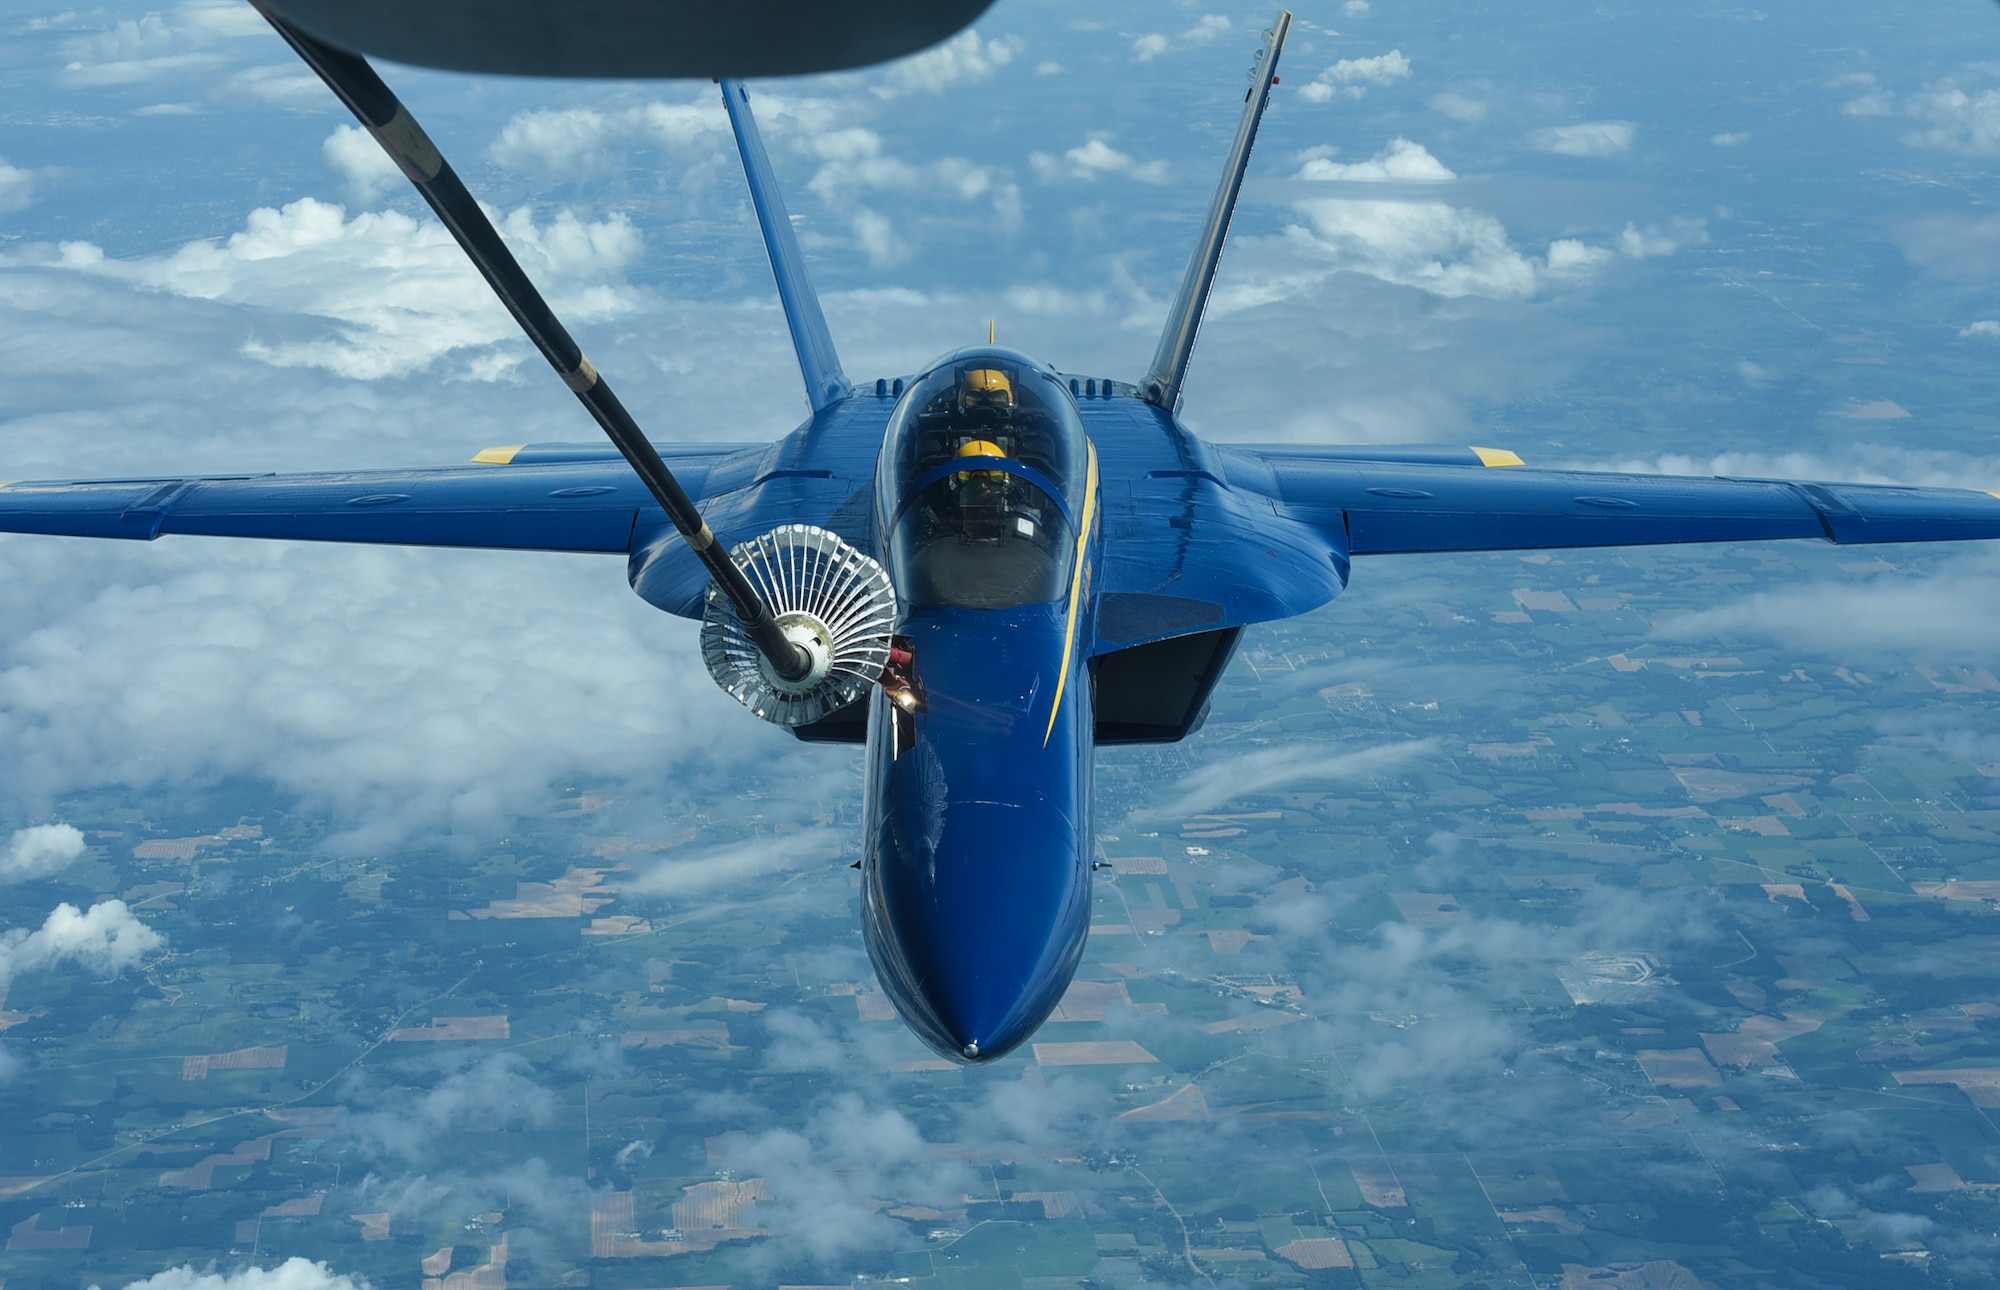 A U.S. Navy Blue Angels F/A-18 Hornet receives fuel from a KC-10 Extender assigned to the 305th Air Mobility Wing on Joint Base McGuire-Dix-Lakehurst, N.J., June 28, 2021. The Blue Angels needed in-flight refueling during their flight home to Florida after participating in an Air Show. (U.S. Air Force photo by Senior Airman Ariel Owings)